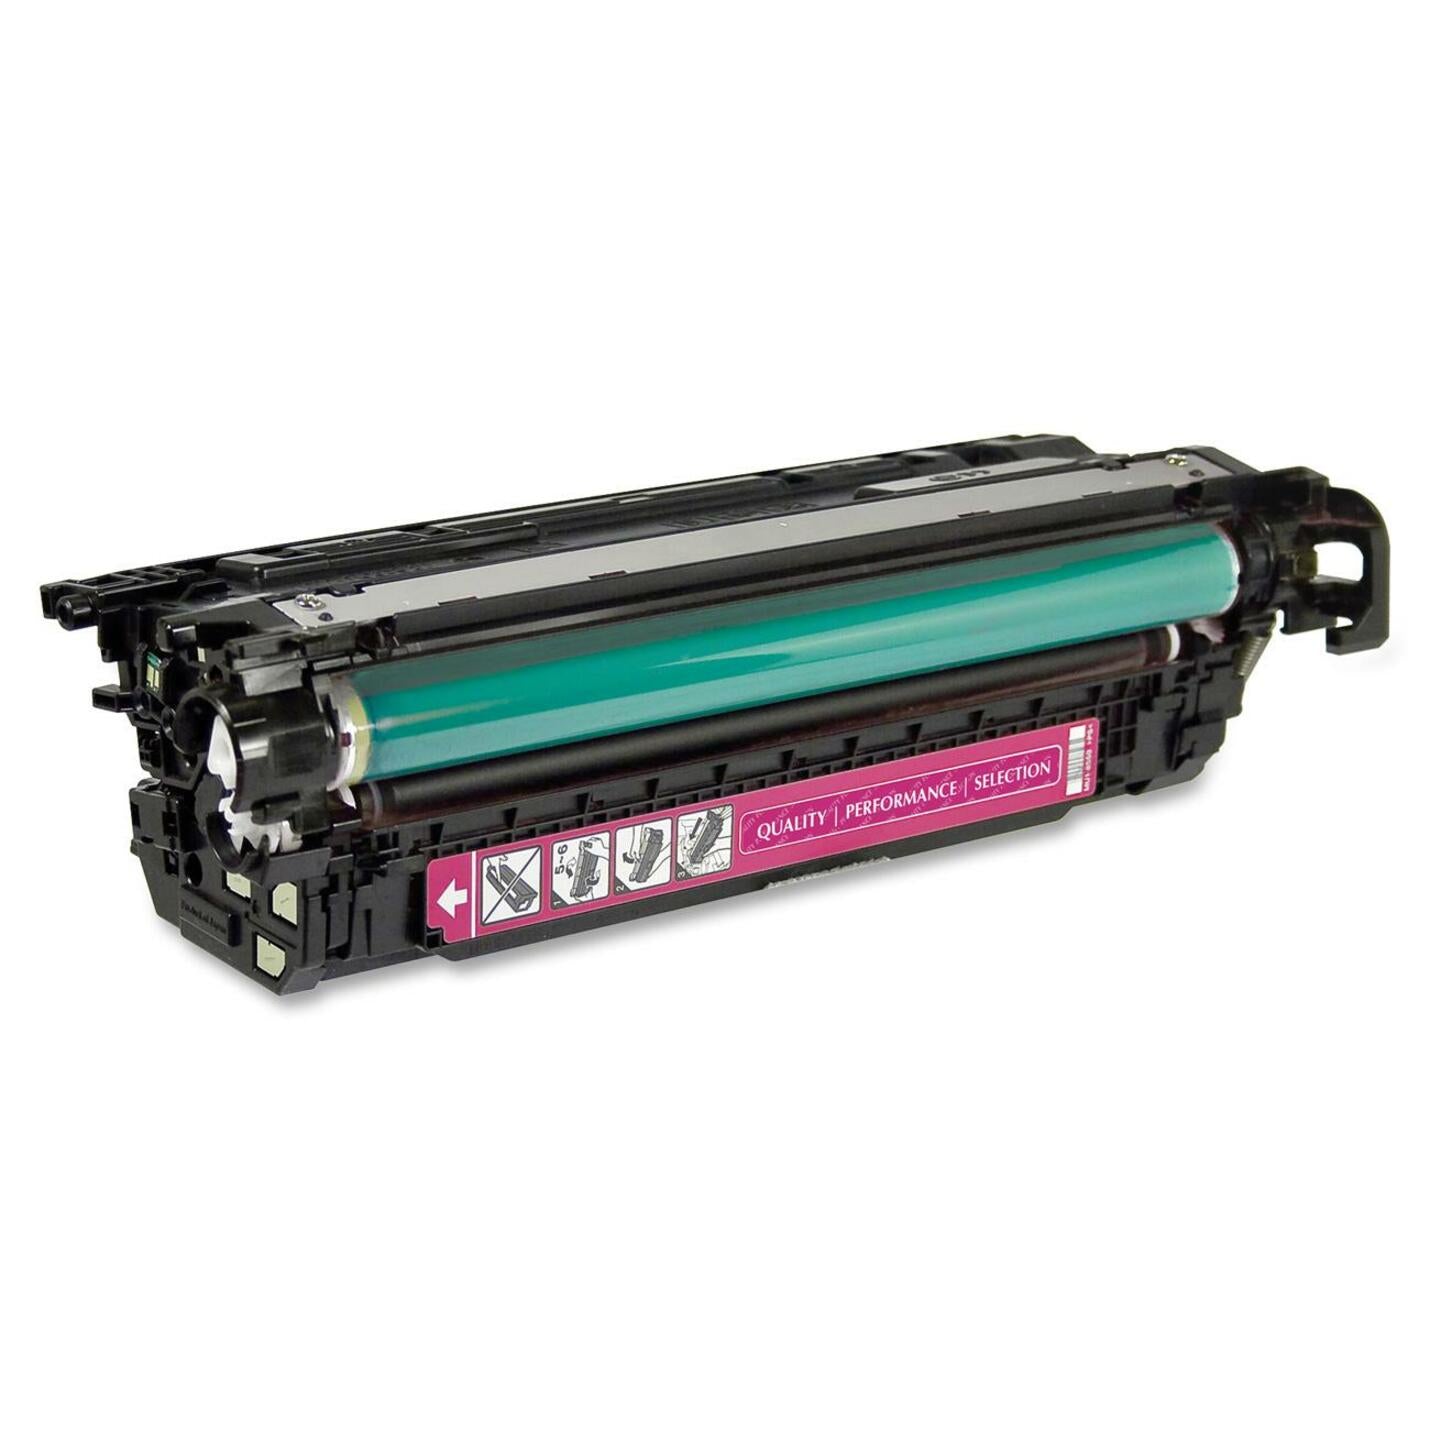 West Point Toner Cartridge, 11,000 Page Yield, Magenta (200243P)